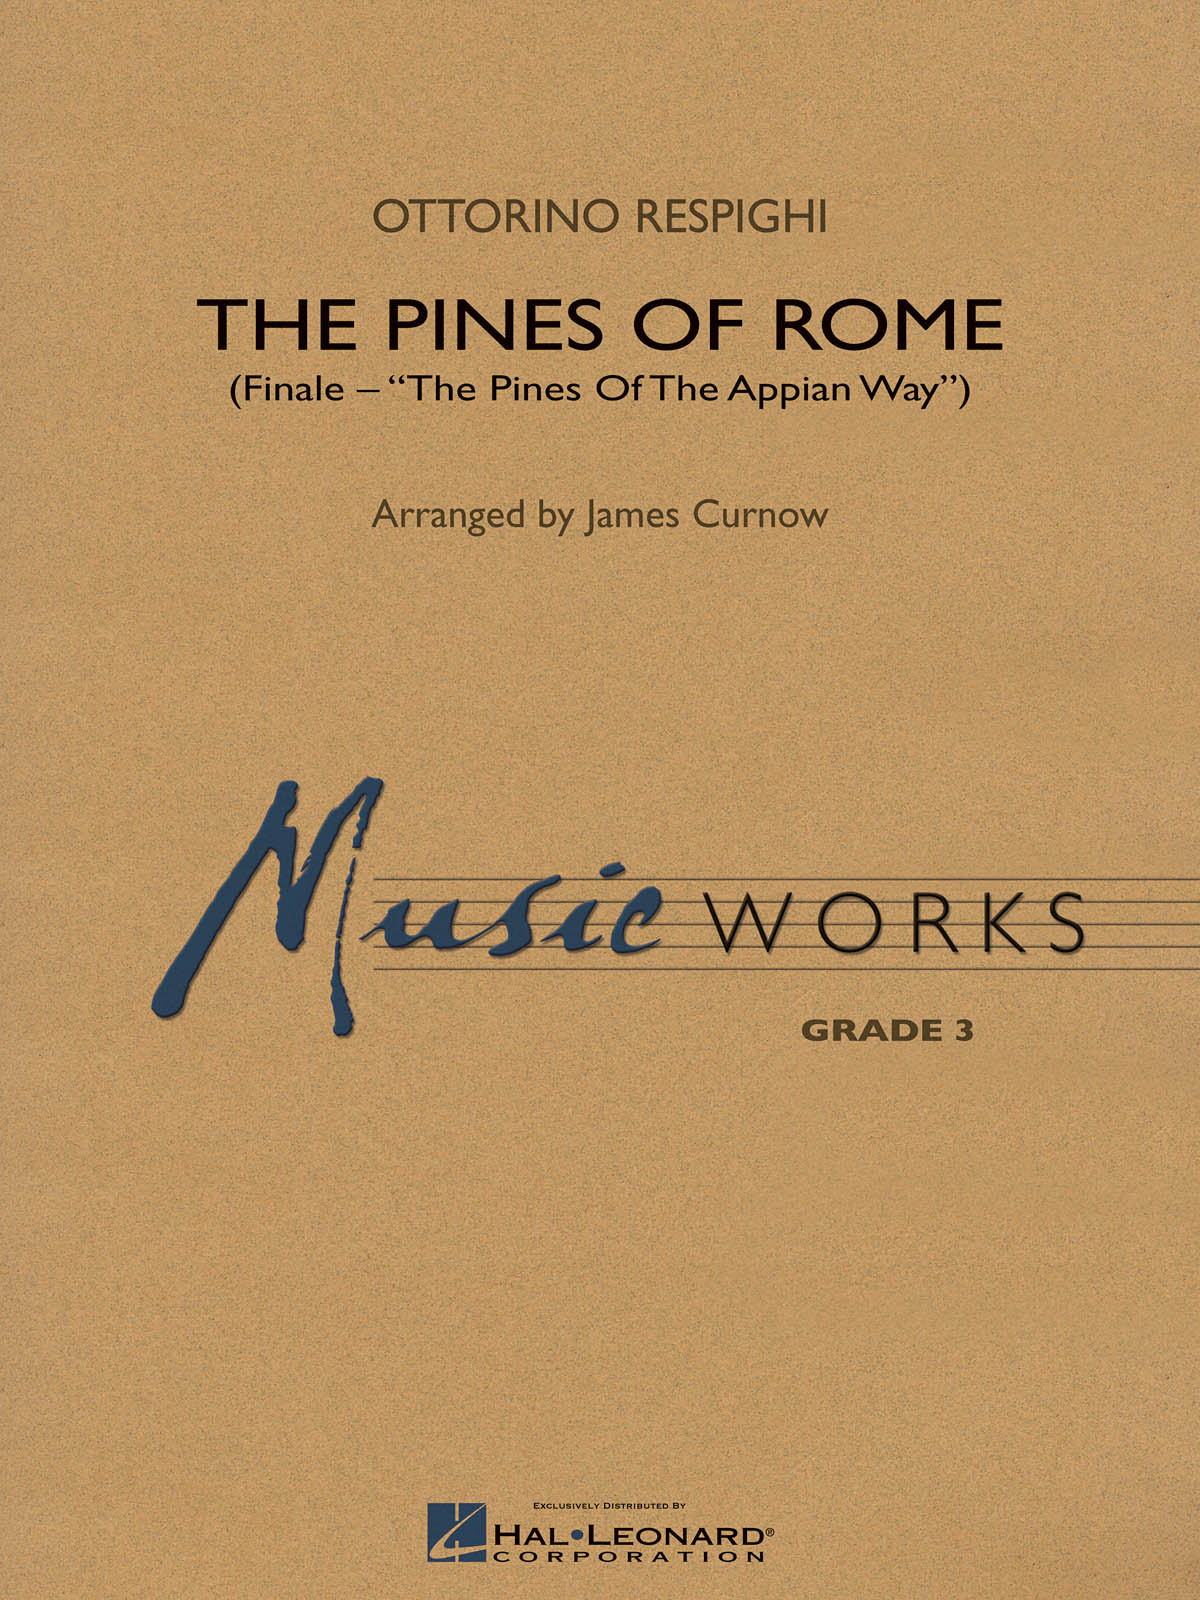 Ottorino Respighi: The Pines of Rome (Finale): Concert Band: Score and Parts